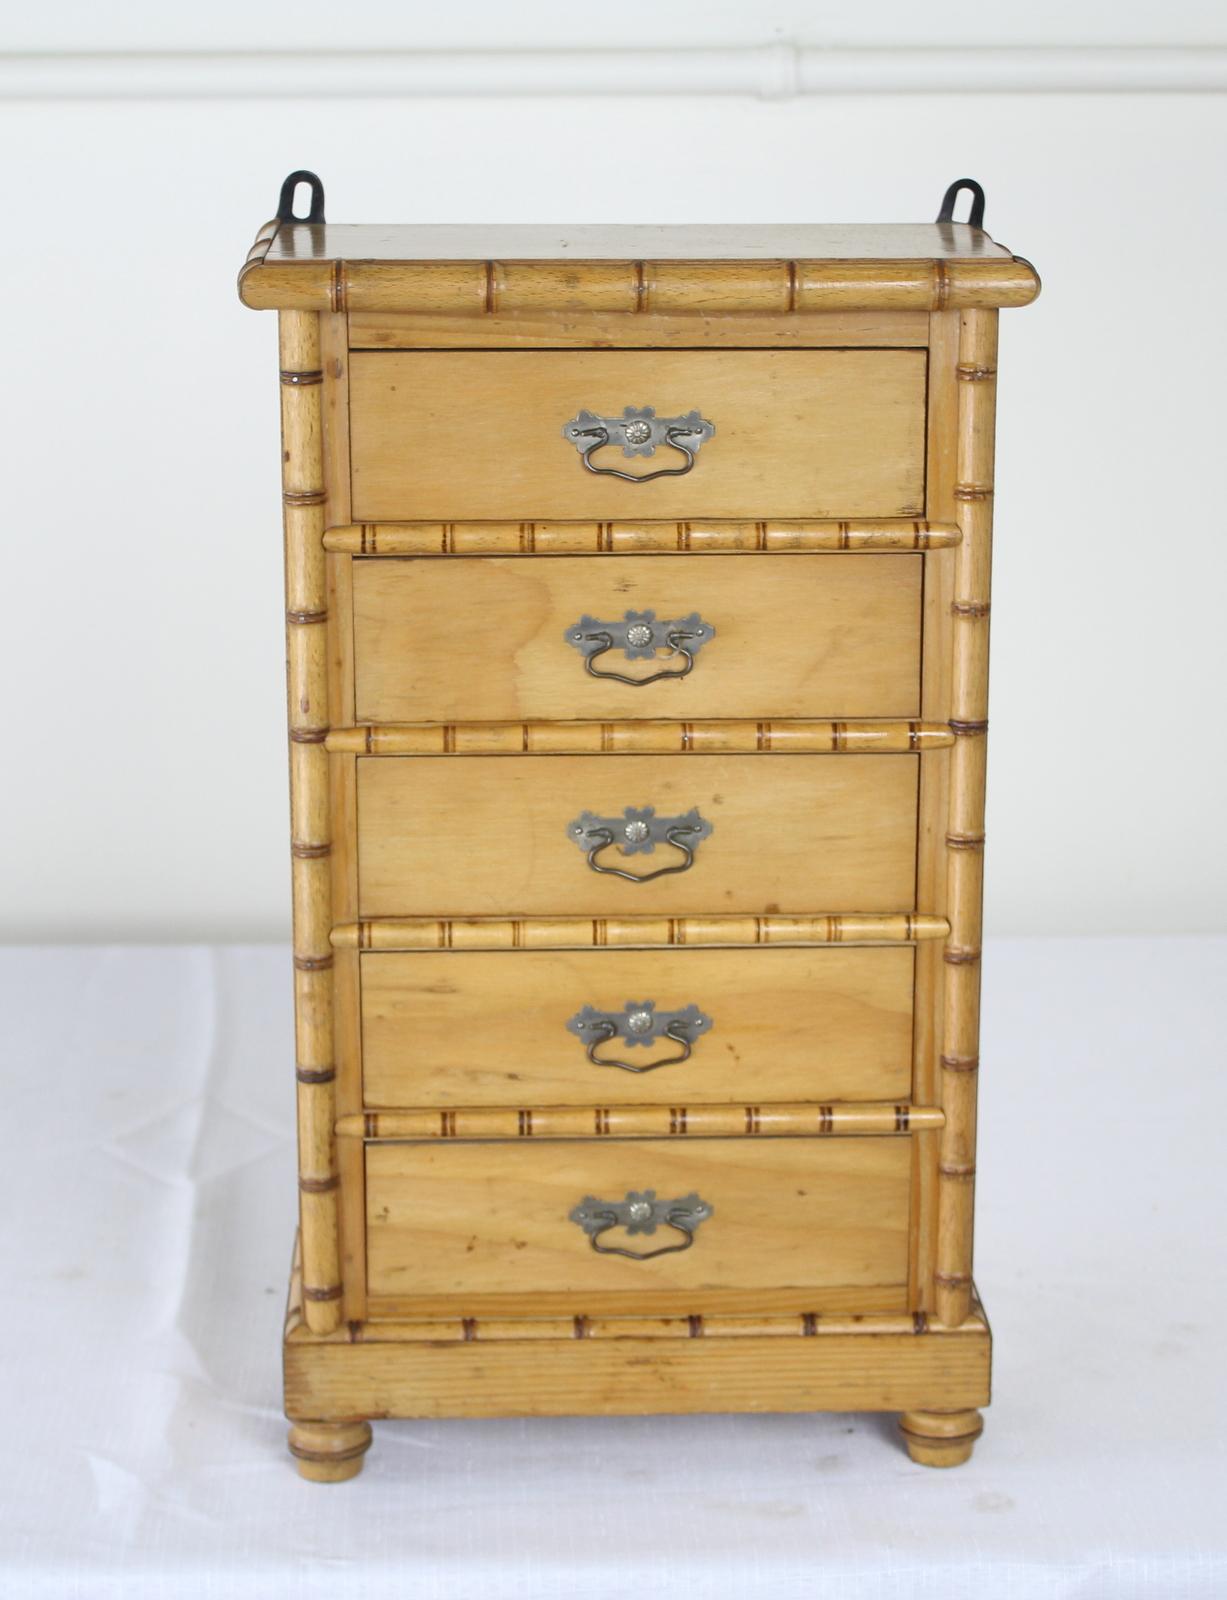 A charming example of 19th century apprentice miniatures, complete with original wire drawer pulls. The interiors of the drawers are quite clean. The piece came to us with metal brackets for hanging, and we have left them in place. However, they can